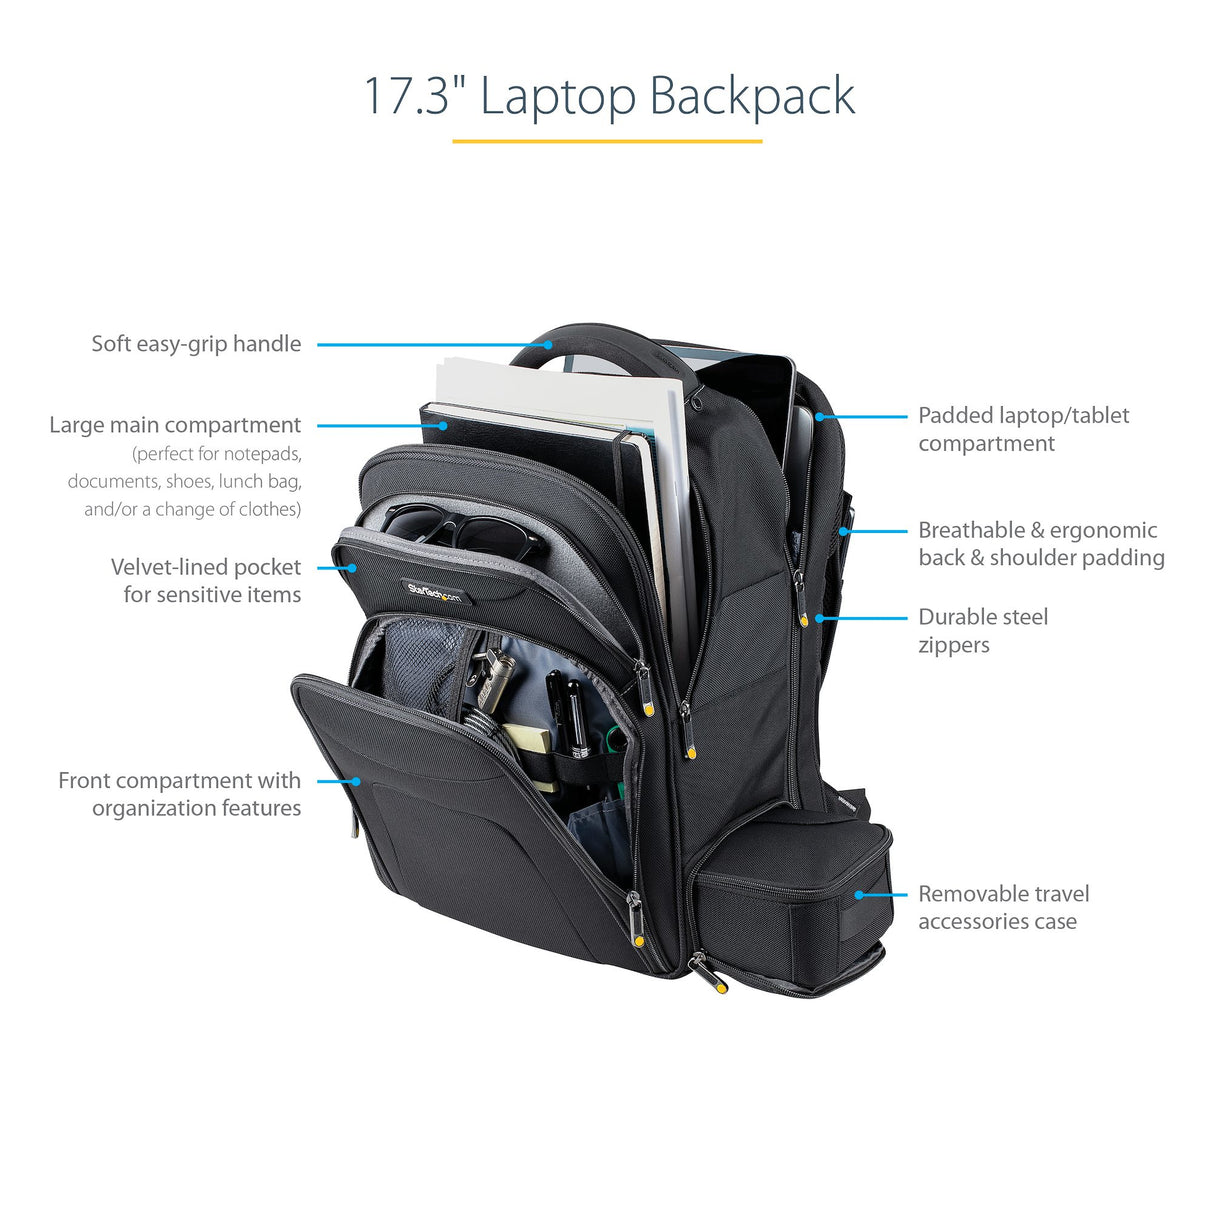 STARTECH 17.3" Laptop Backpack with Removable Accessory Case - Professional IT Tech Backpack for Work|Travel|Commute - Durable Ergonomic Computer Bag - Nylon - Notebook|Tablet Pockets (NTBKBAG173) (NTBKBAG173) STARTECH